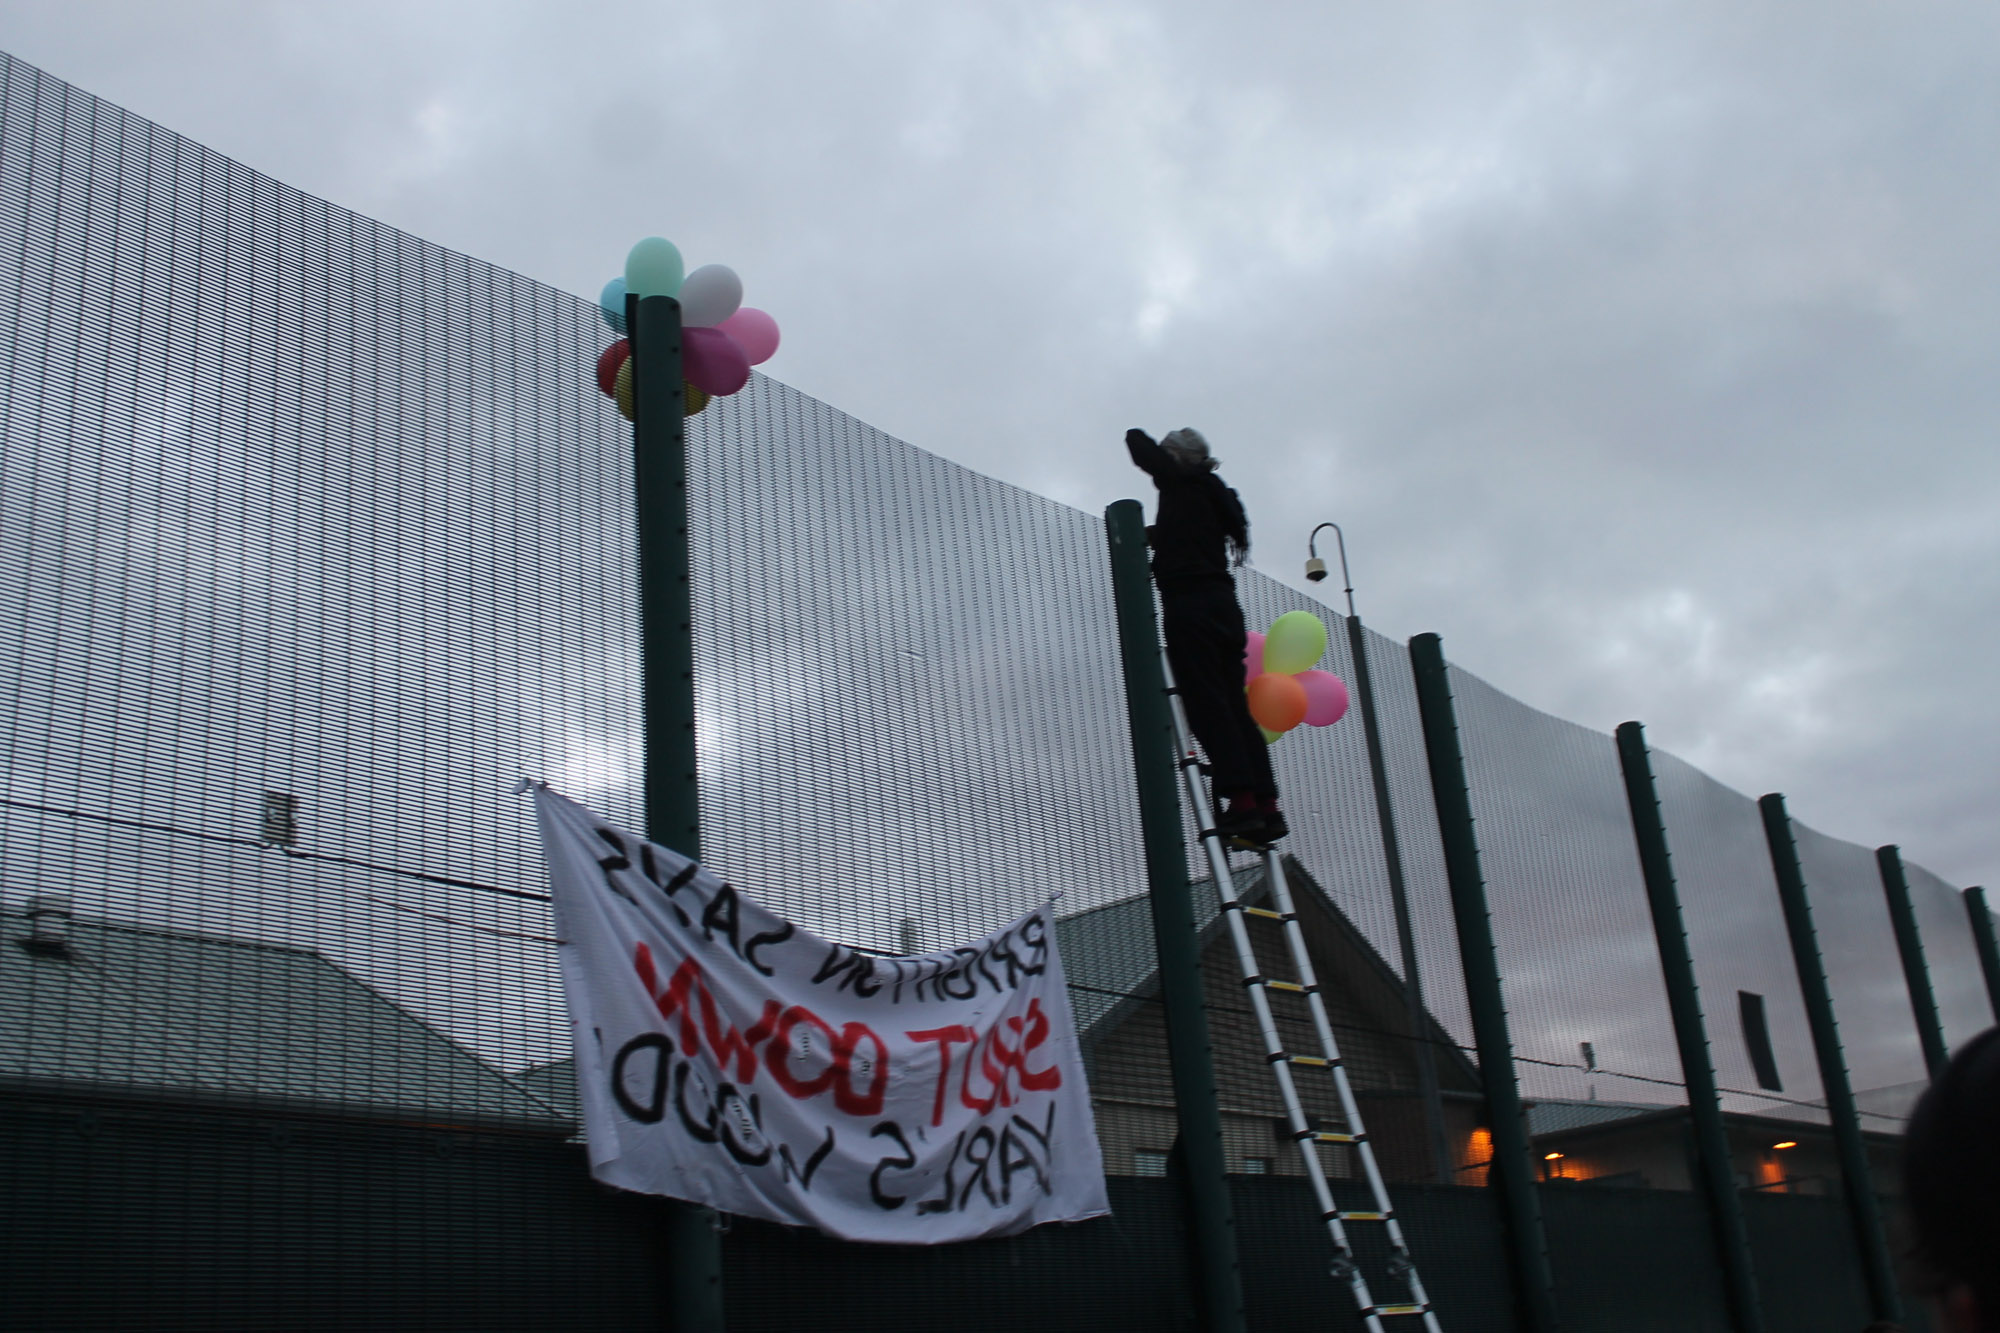 A man standing on a ladder at the barriers of yarls wood to show support to the detainees